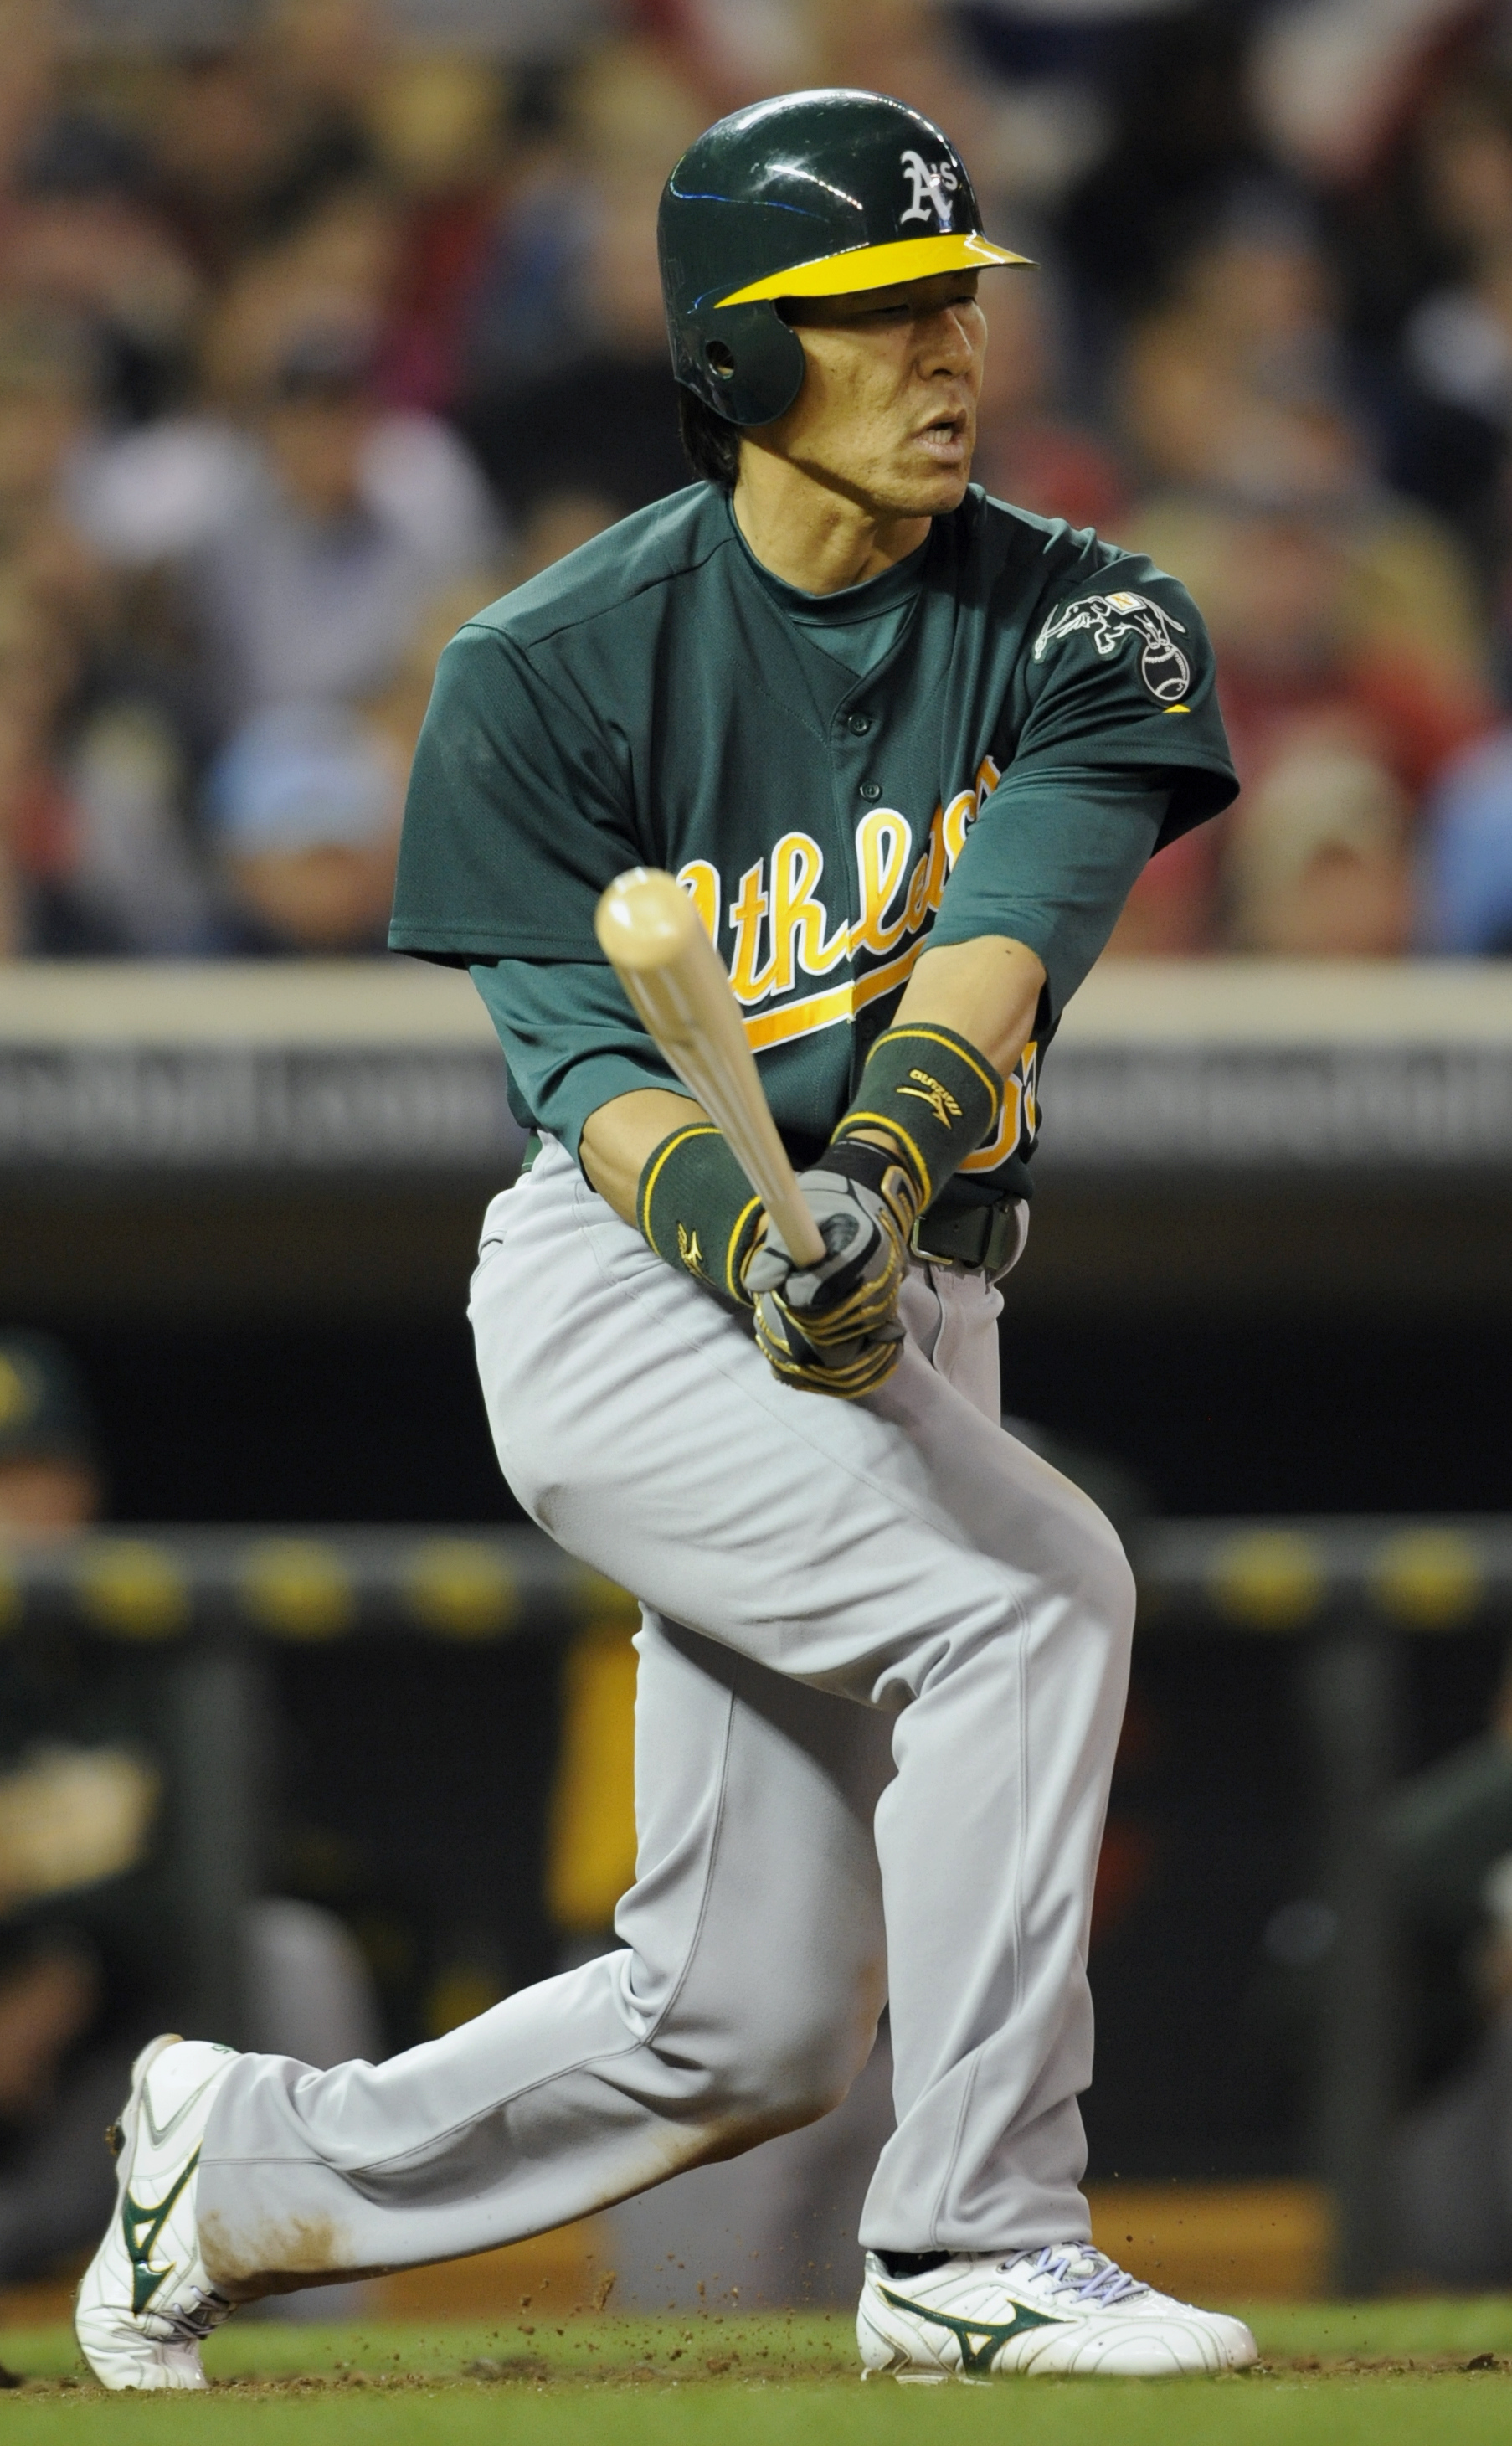 MINNEAPOLIS, MN - APRIL 9: Hideki Matsui #55 of the Oakland Athletics reacts to striking out with the bases loaded against the Minnesota Twins during the seventh inning of their game on April 9, 2011 at Target Field in Minneapolis, Minnesota. Athletics de